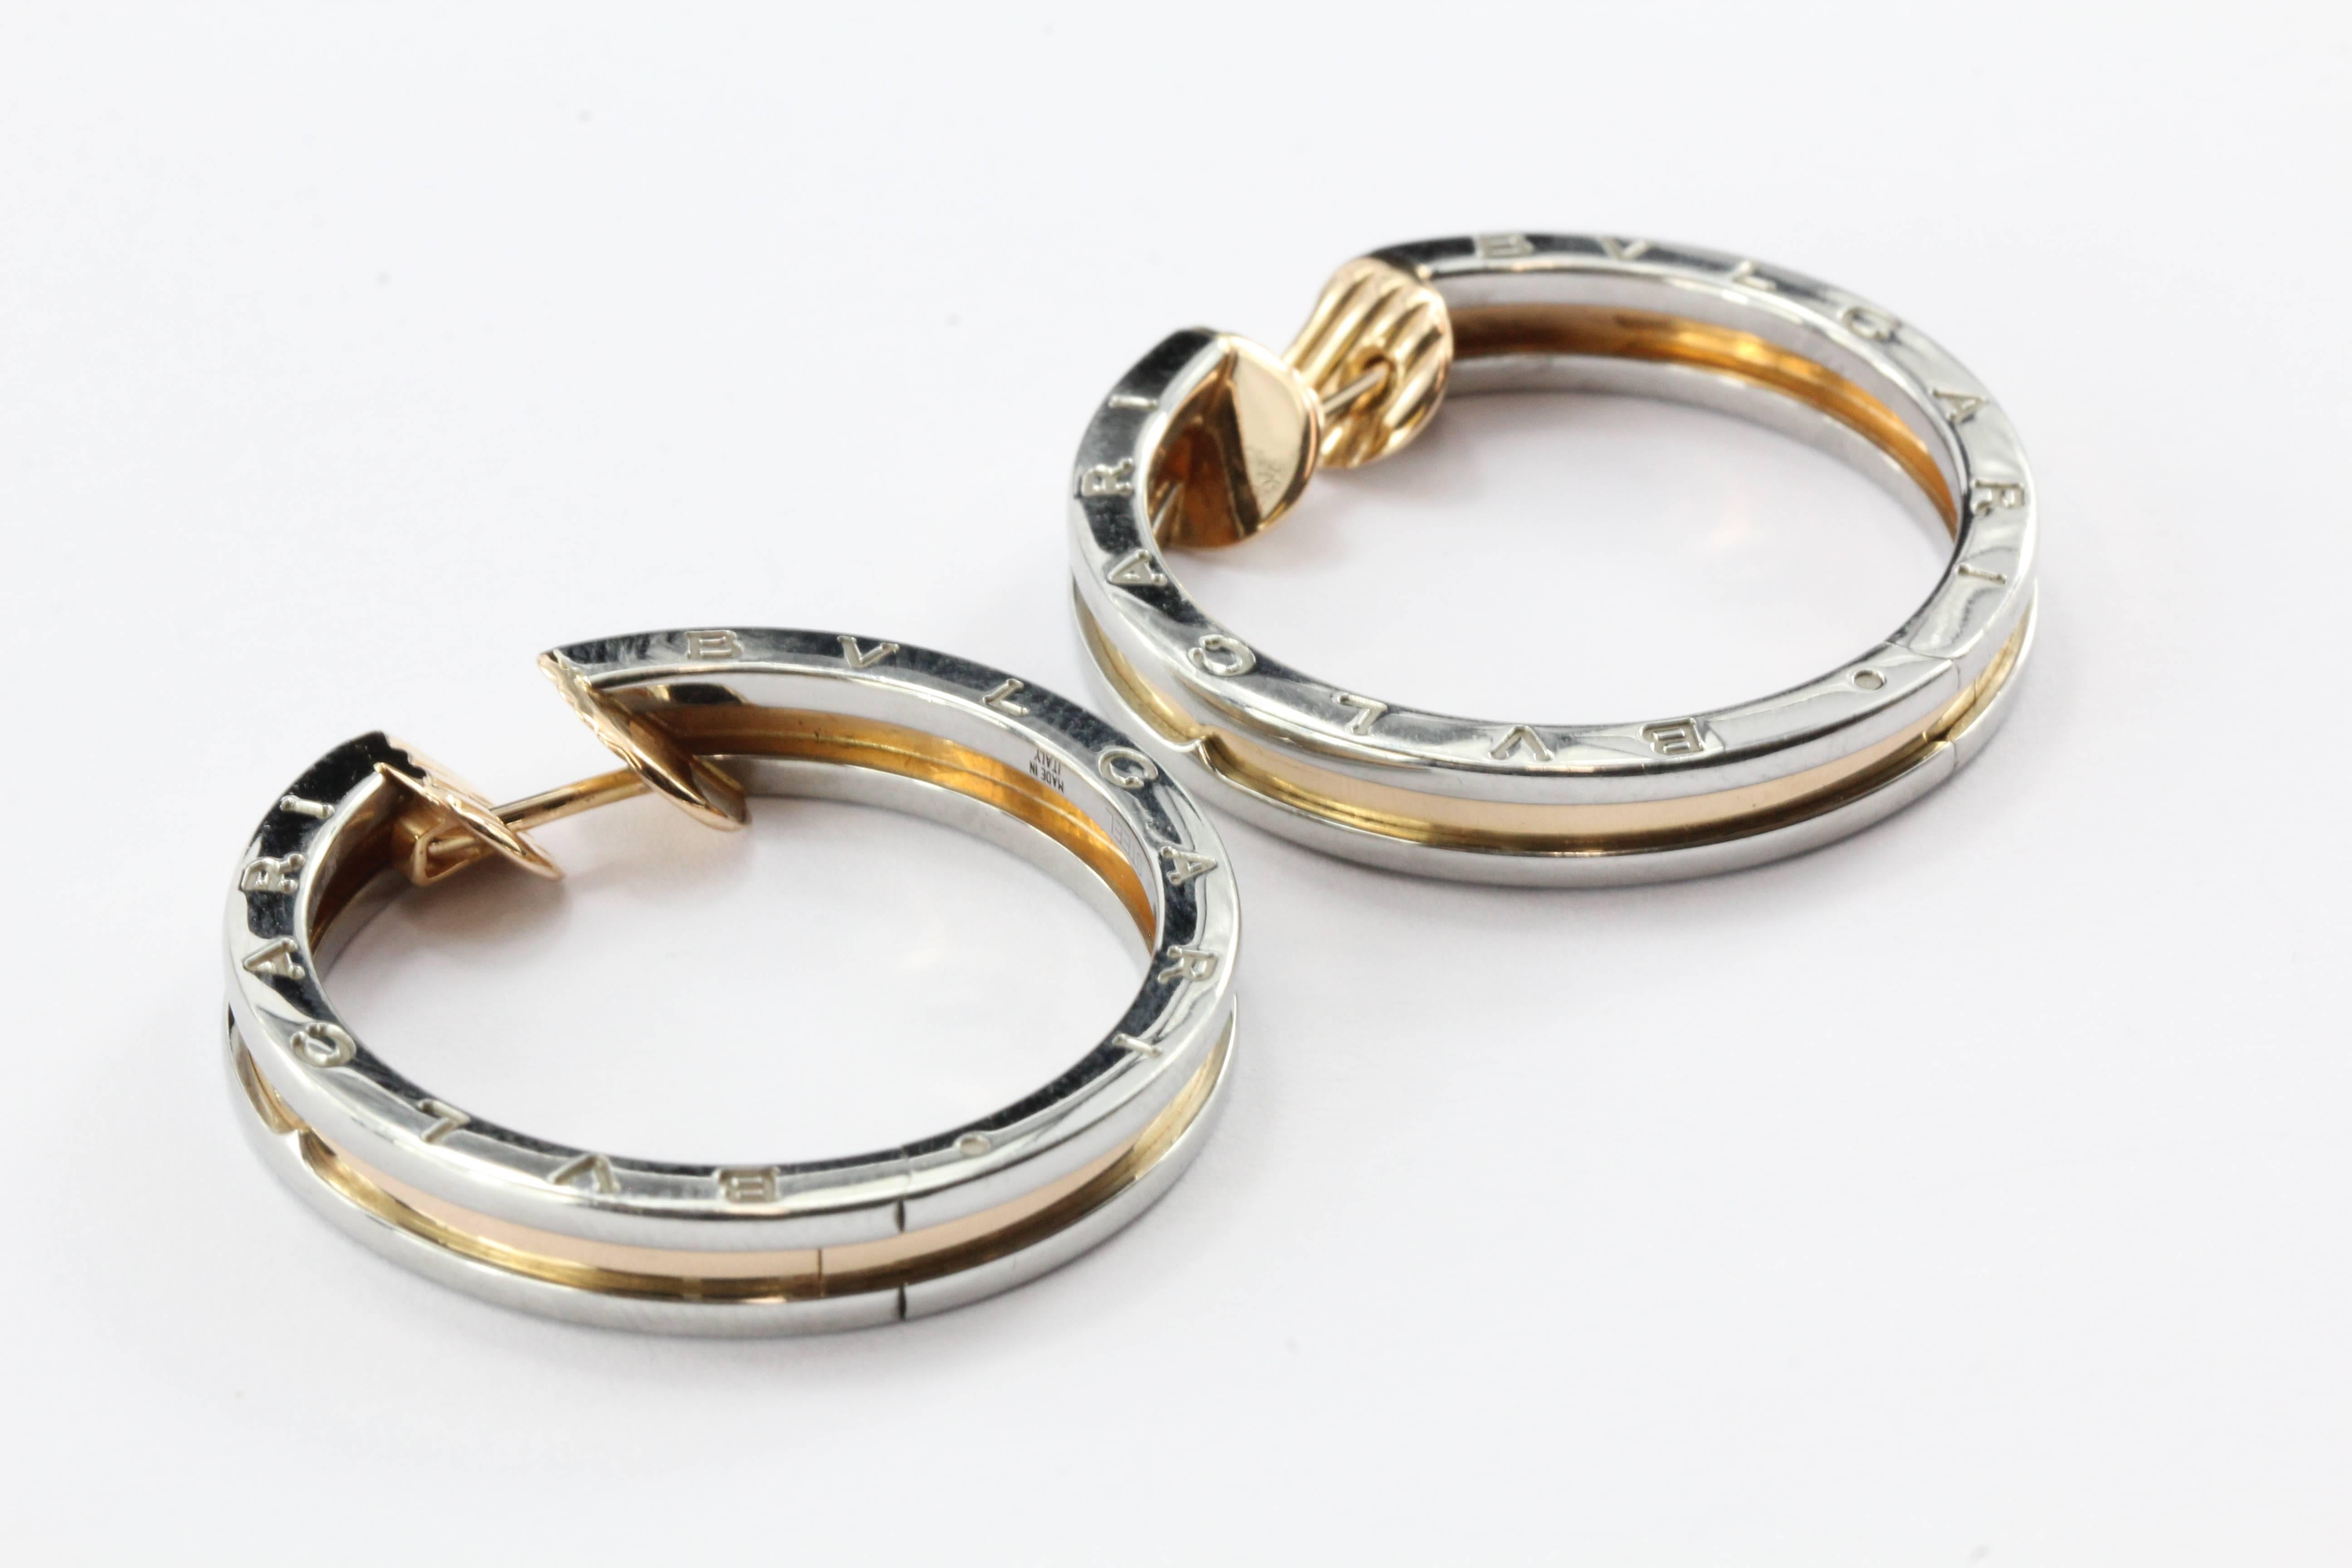 Bulgari B Zero 18K Pink Gold & Steel Hoop Earrings. The earrings are in excellent used estate condition and ready to wear. They come in their original case and box. They are signed 